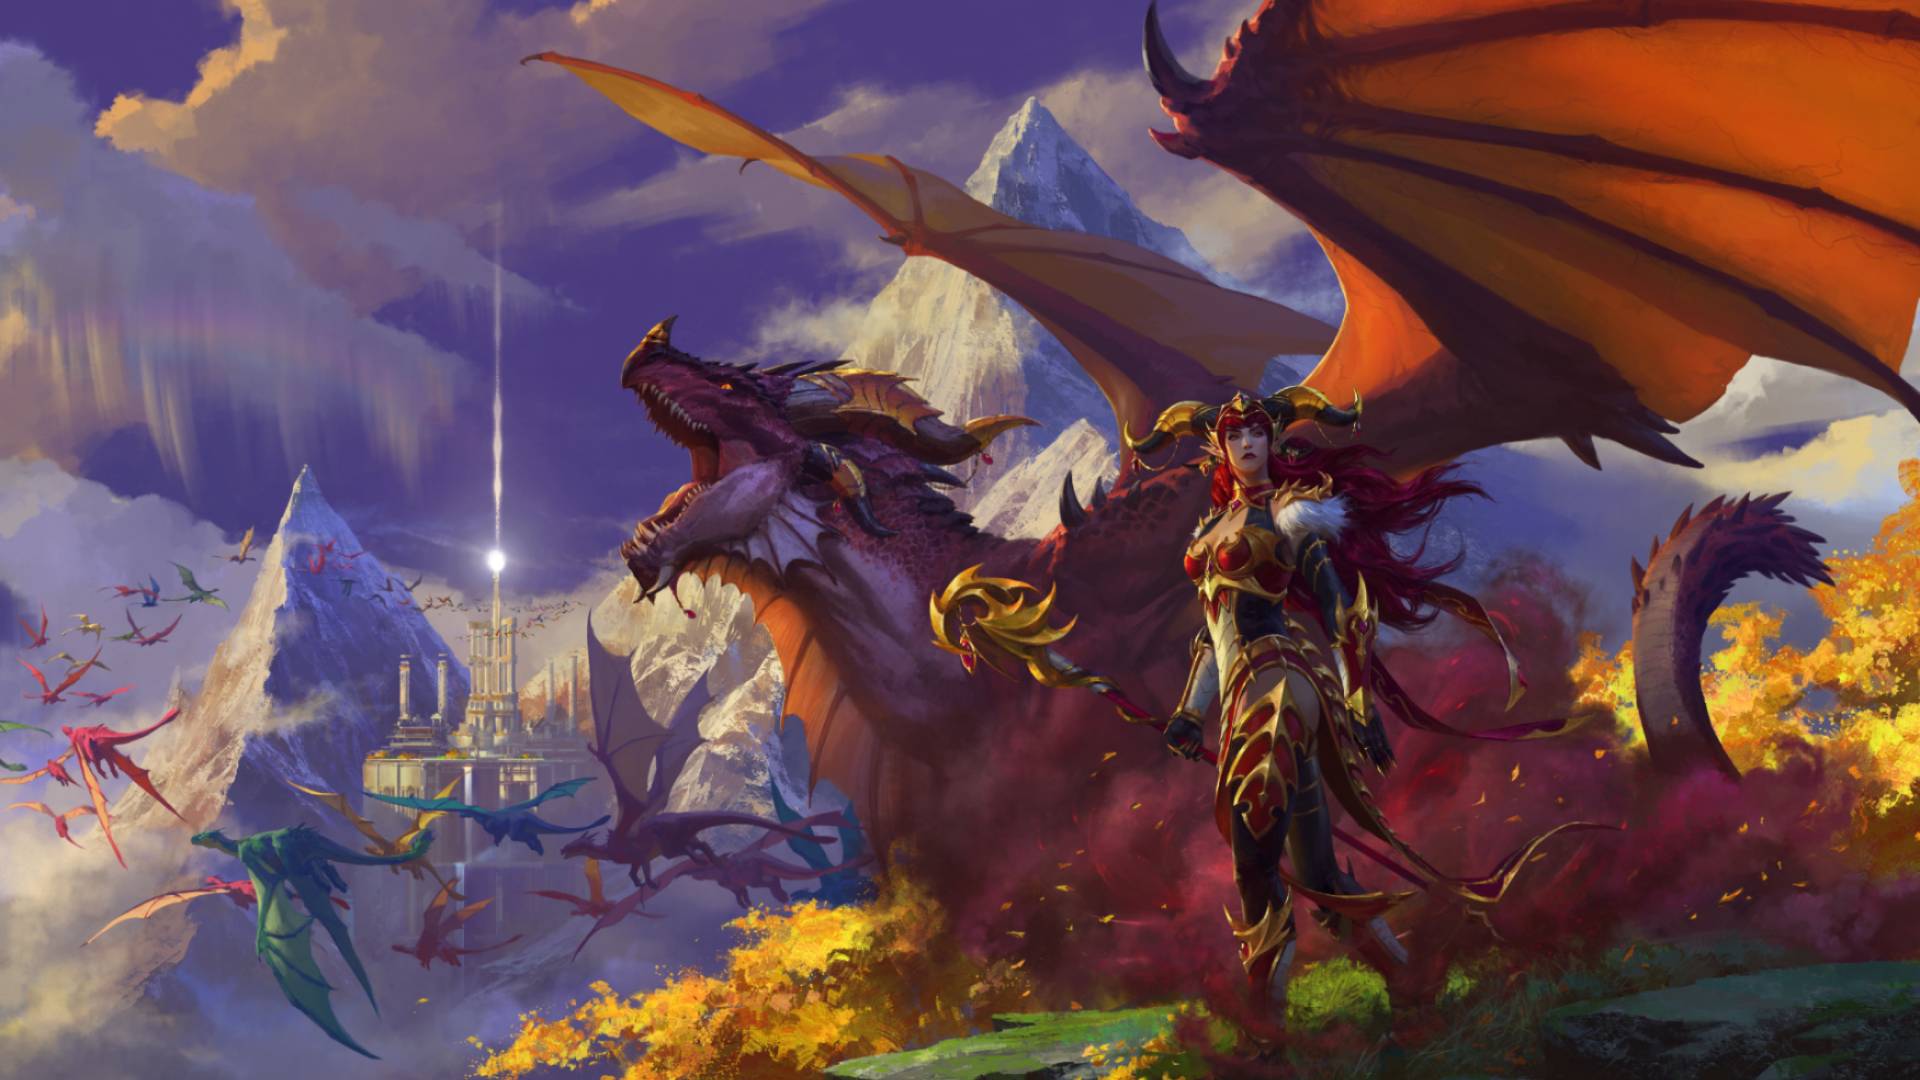 World of Warcraft: WoW character Alextrasza, a woman with huge red dragon horns wearing leather red and gold armor, stands in front of a huge, roaring red dragon in an idyllic green landscape